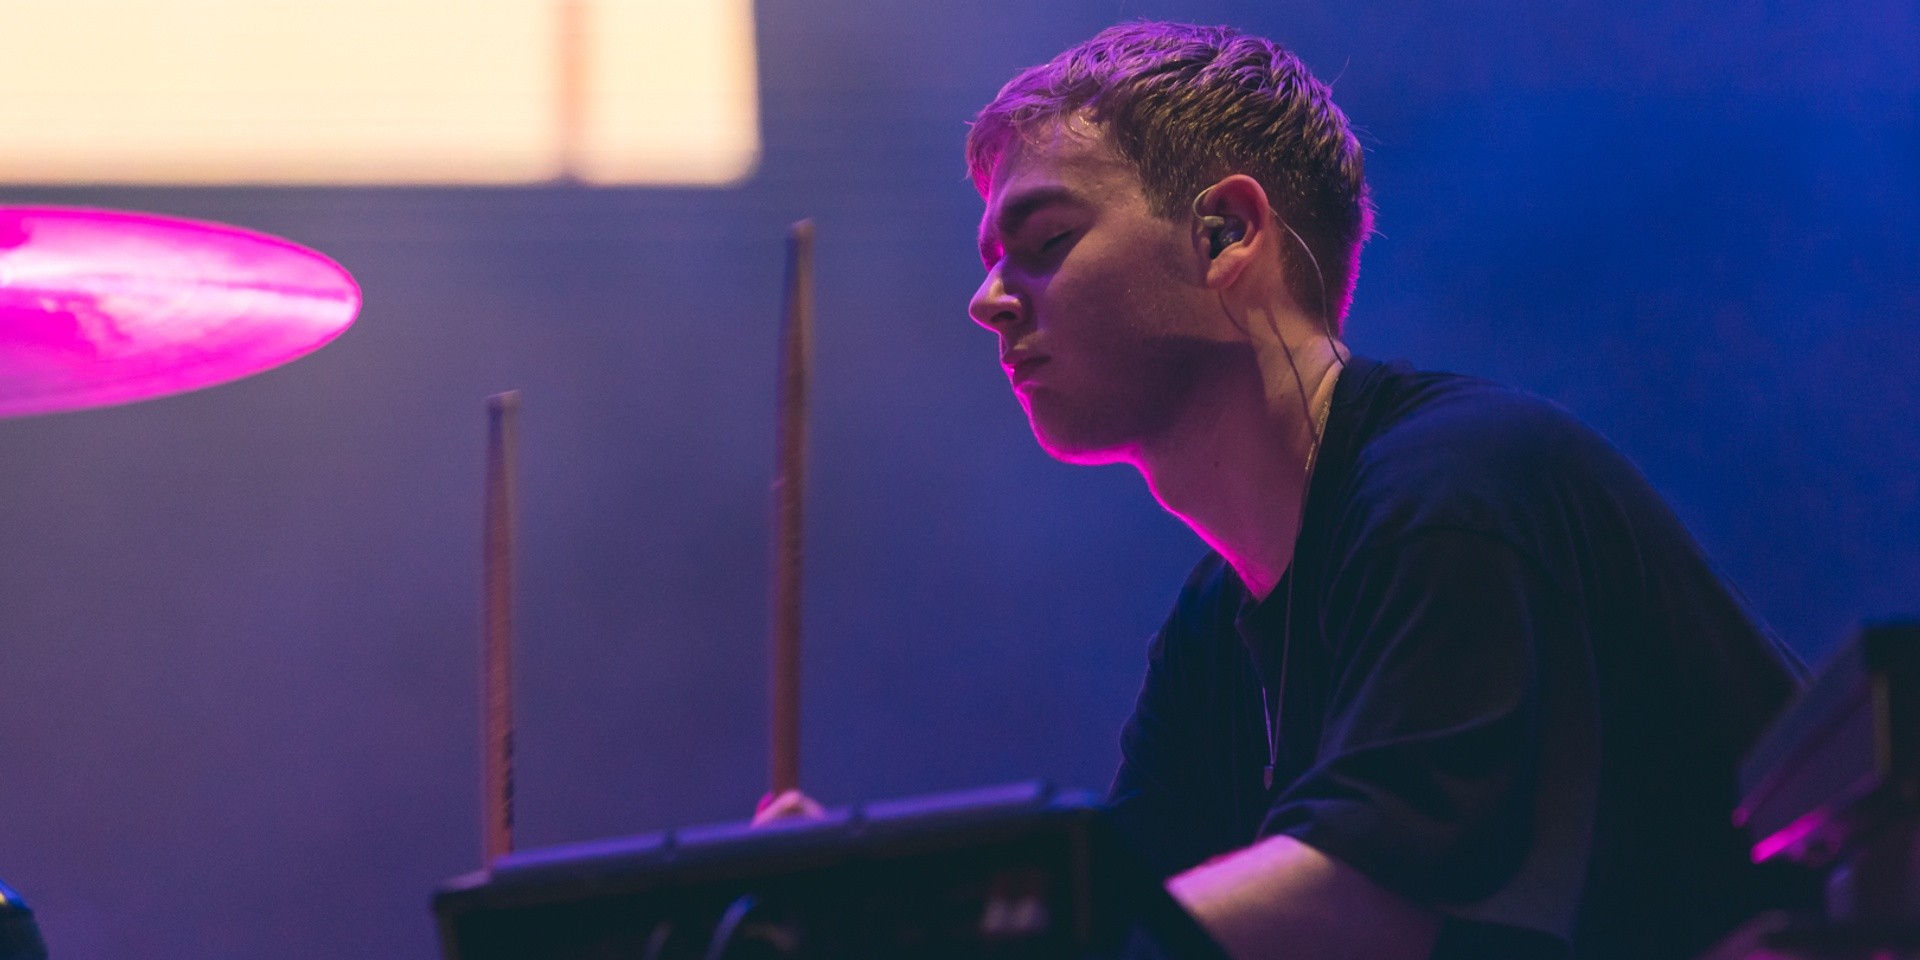 "I've had a good year": An interview with Mura Masa